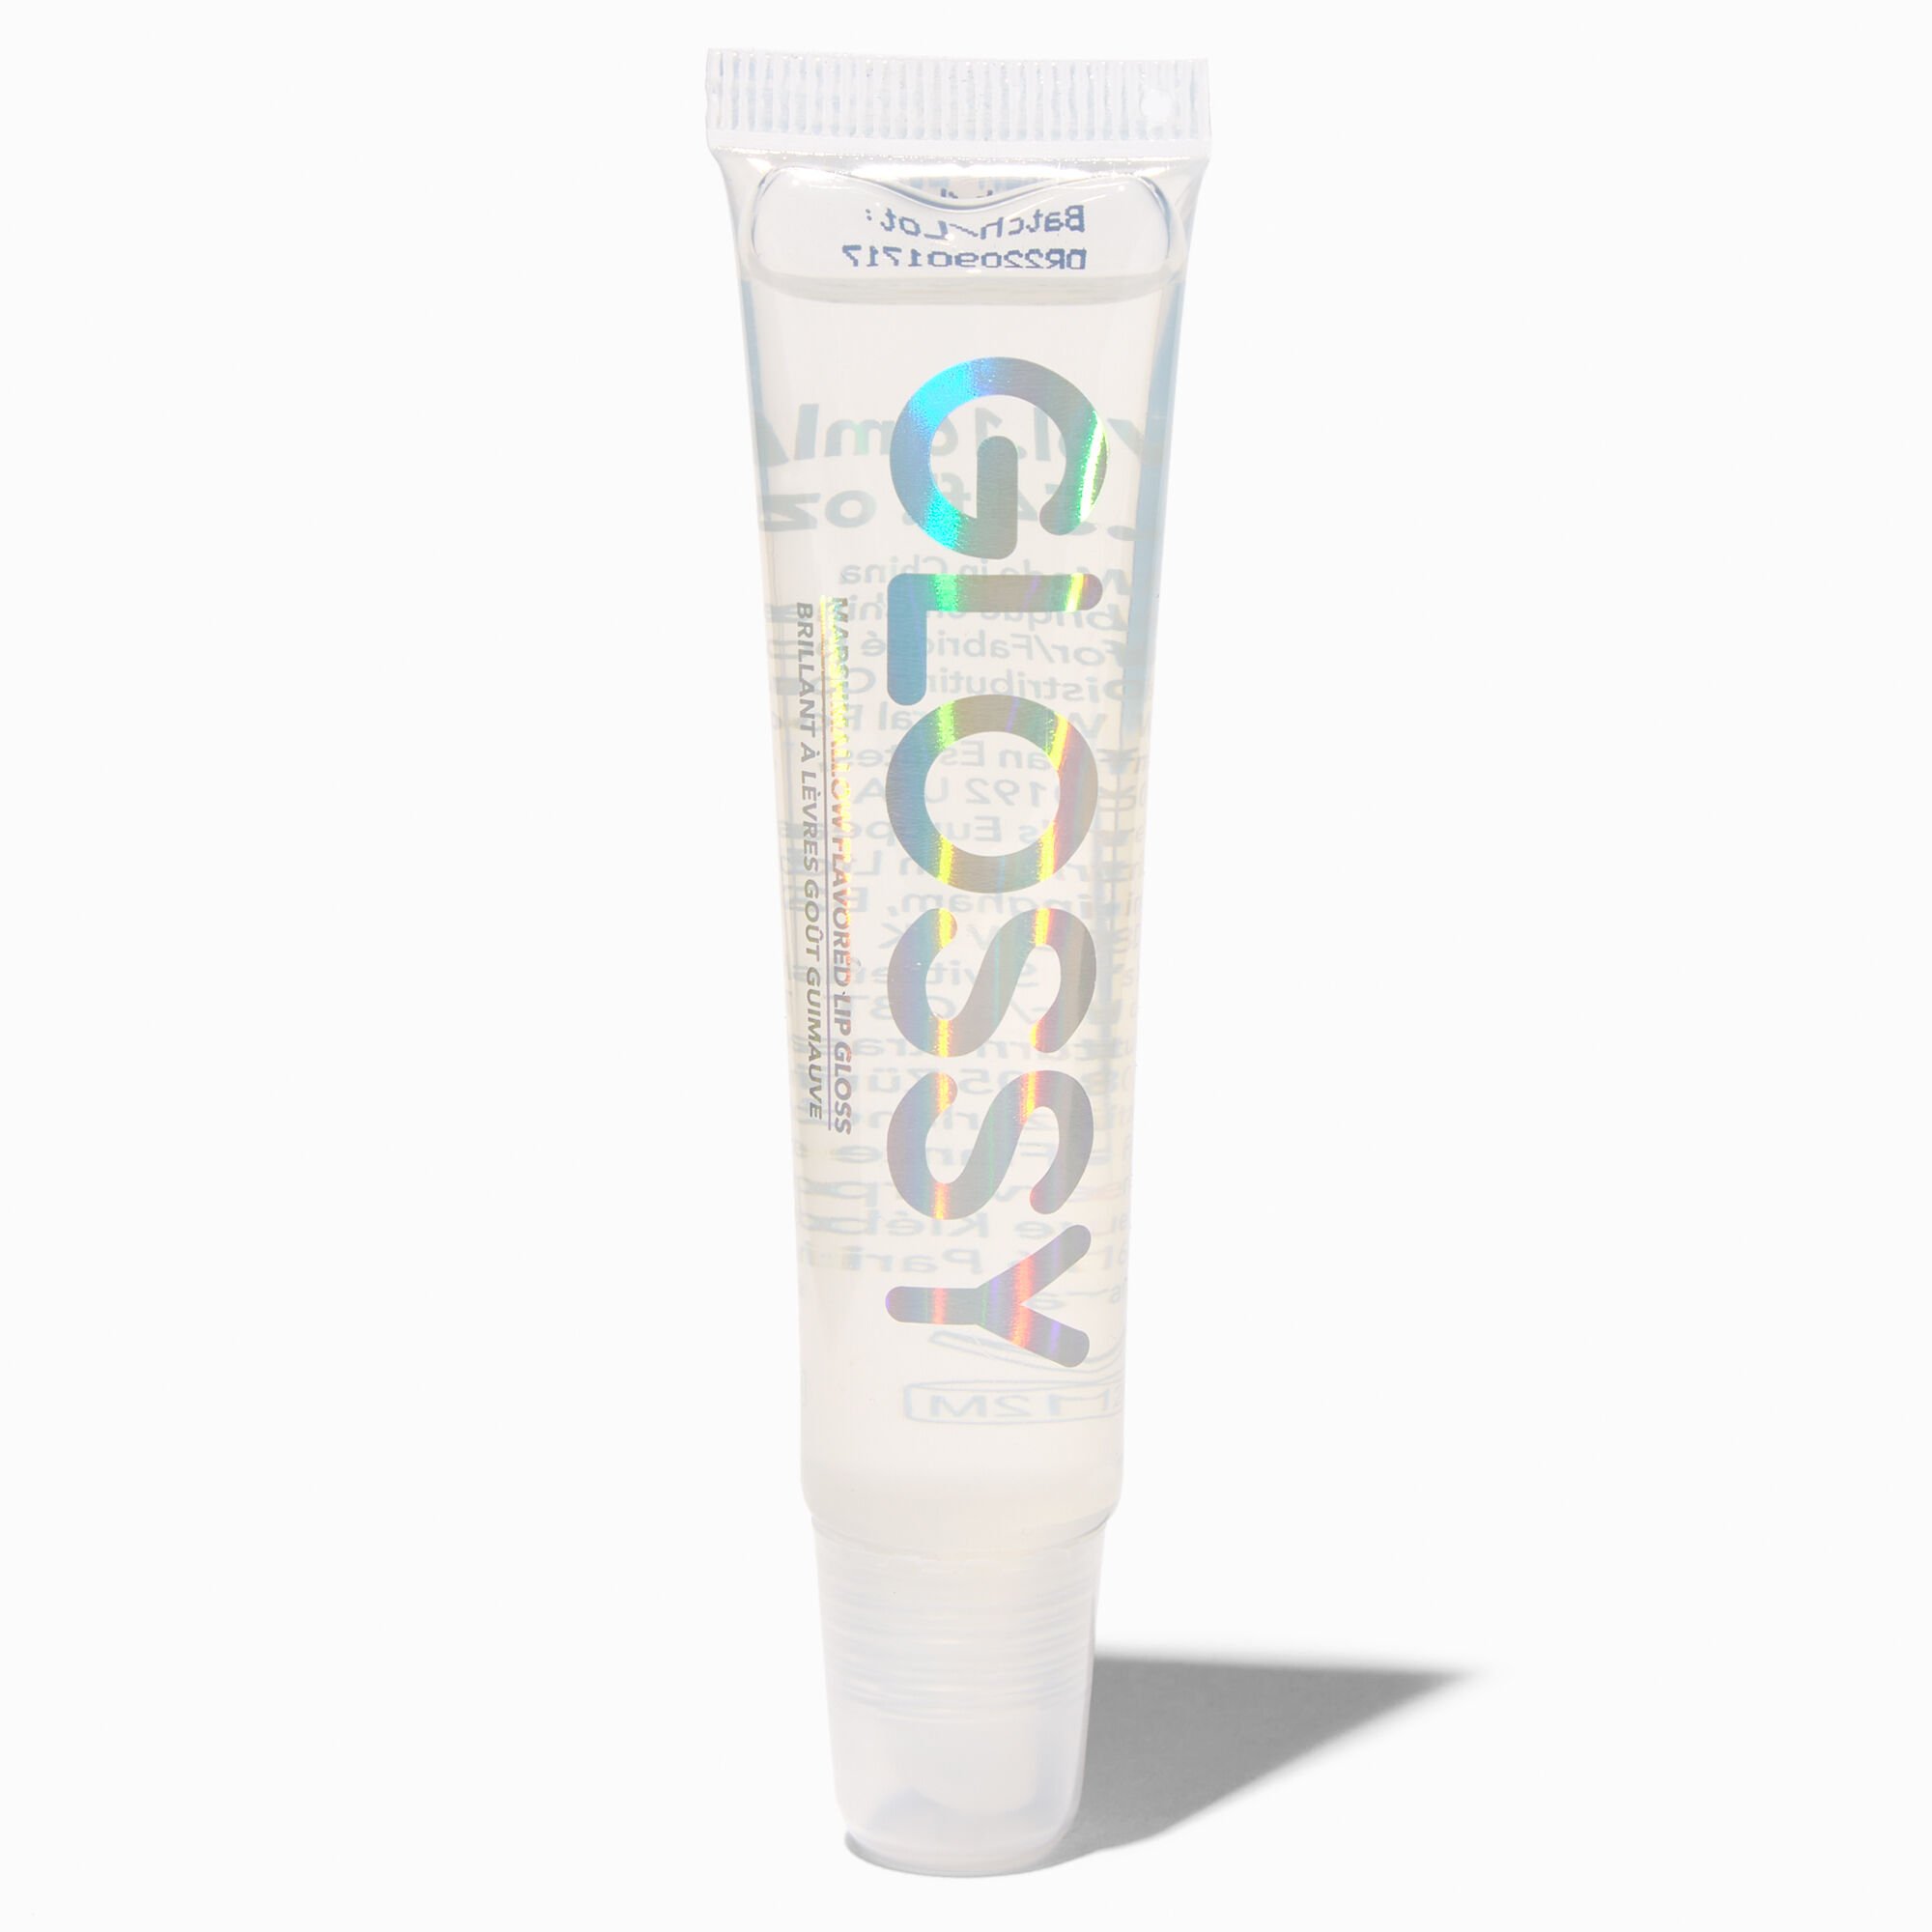 View Claires Glossy Lip Gloss Clear information